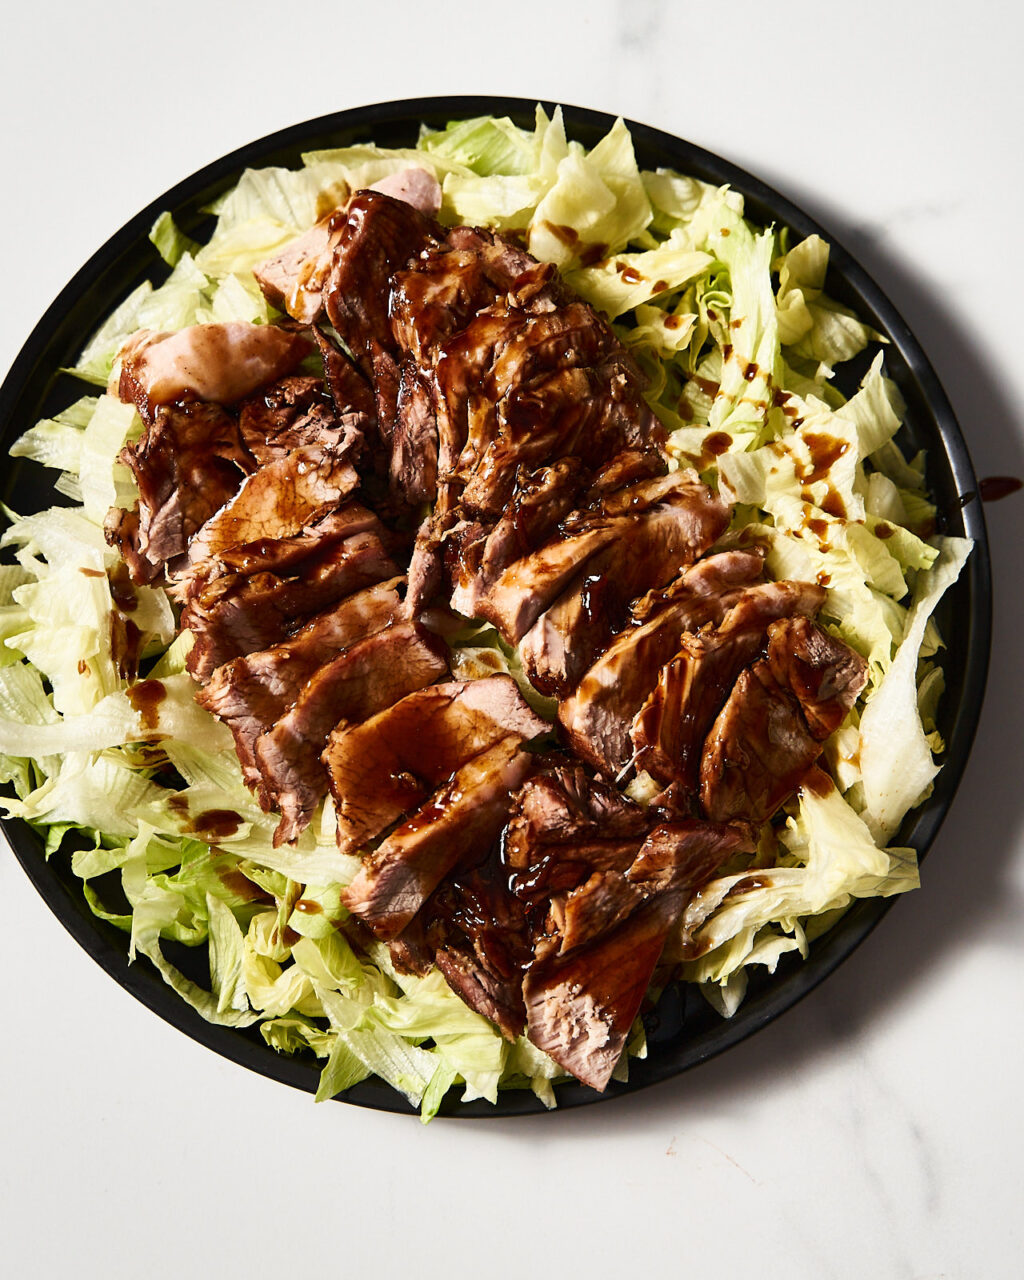 Chinese-style pork stewed in soy sauce on a plate with iceberg lettuce